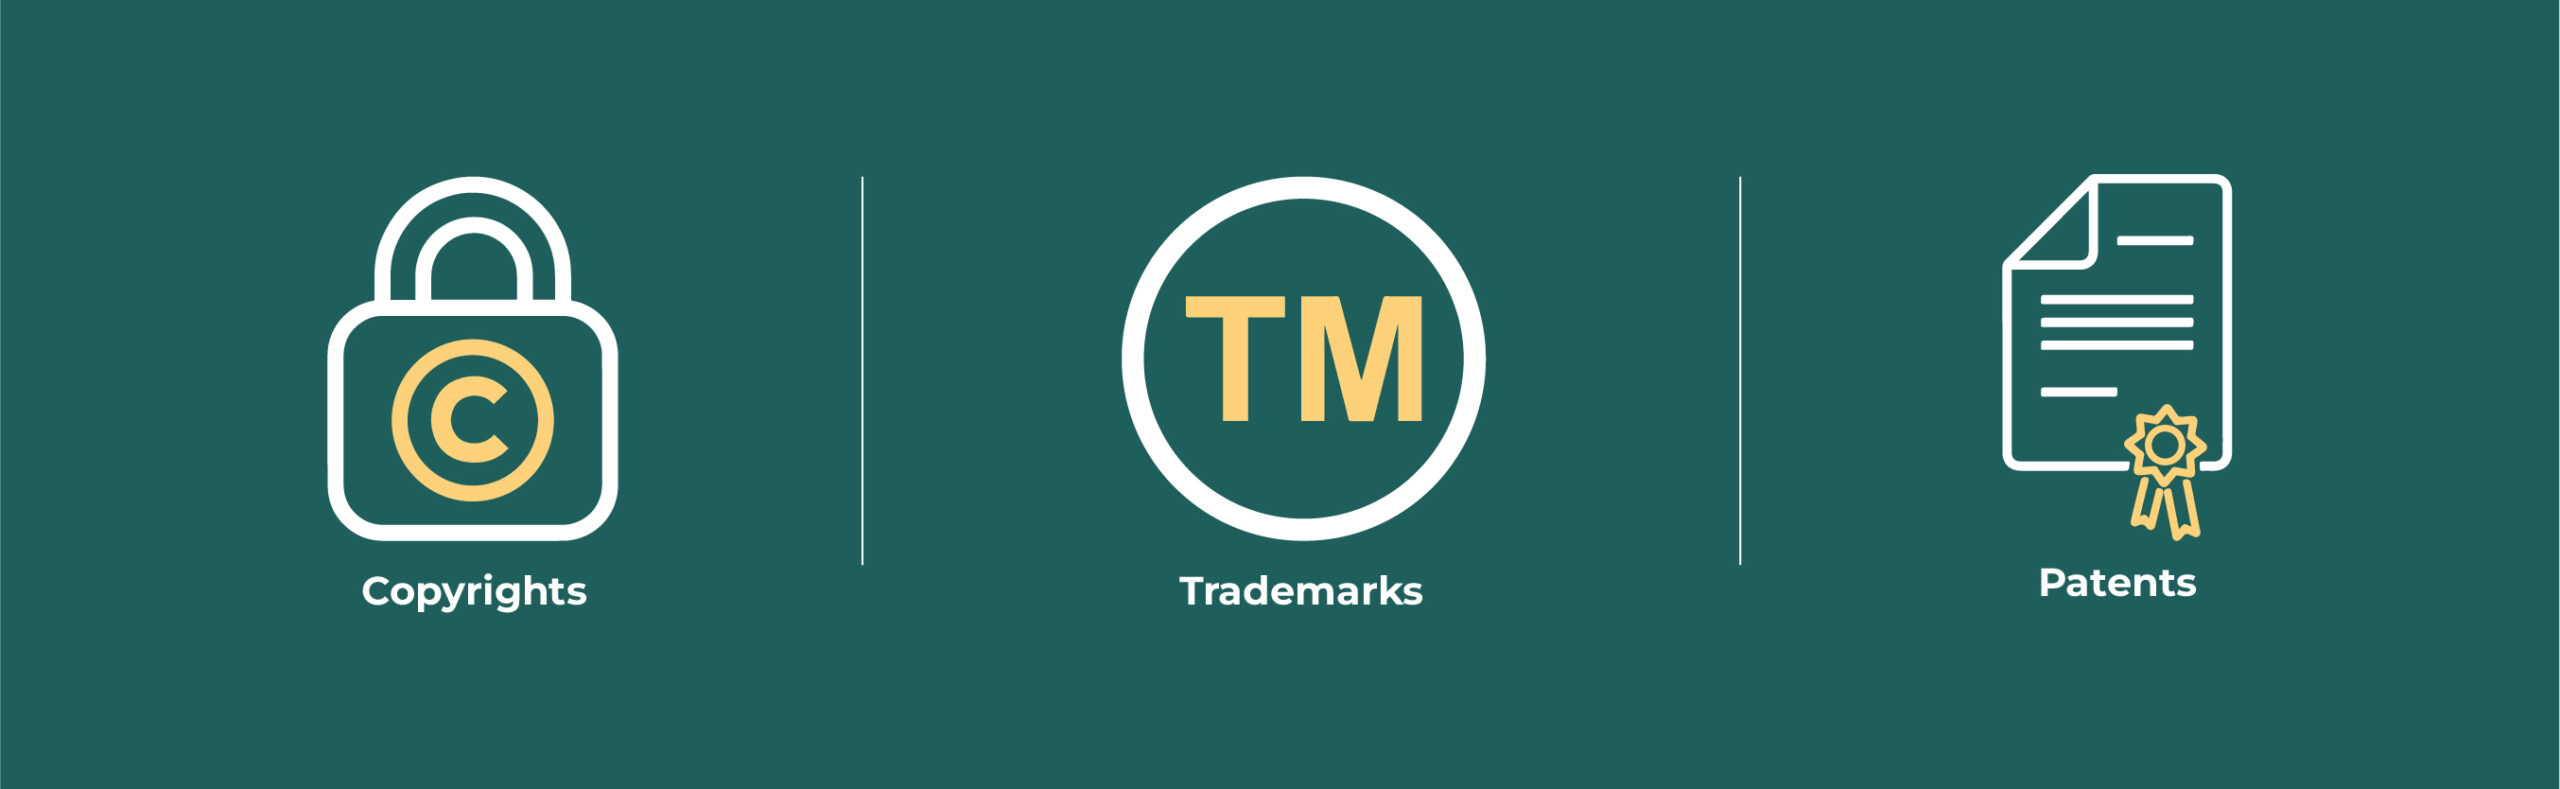 Difference between Copyrights, Trademarks and Patents